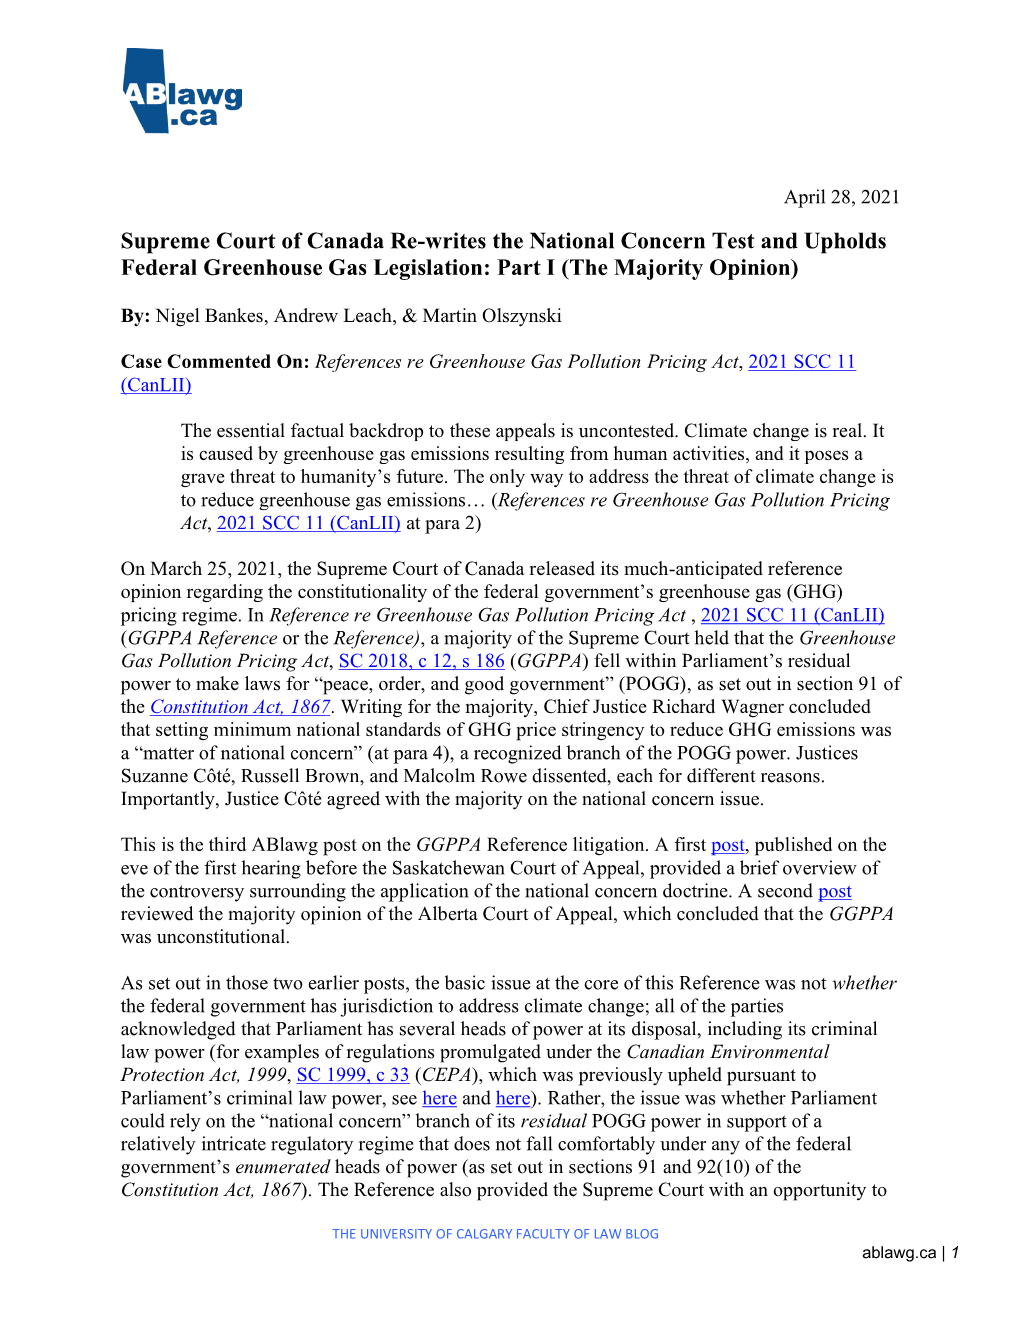 Supreme Court of Canada Re-Writes the National Concern Test and Upholds Federal Greenhouse Gas Legislation: Part I (The Majority Opinion)